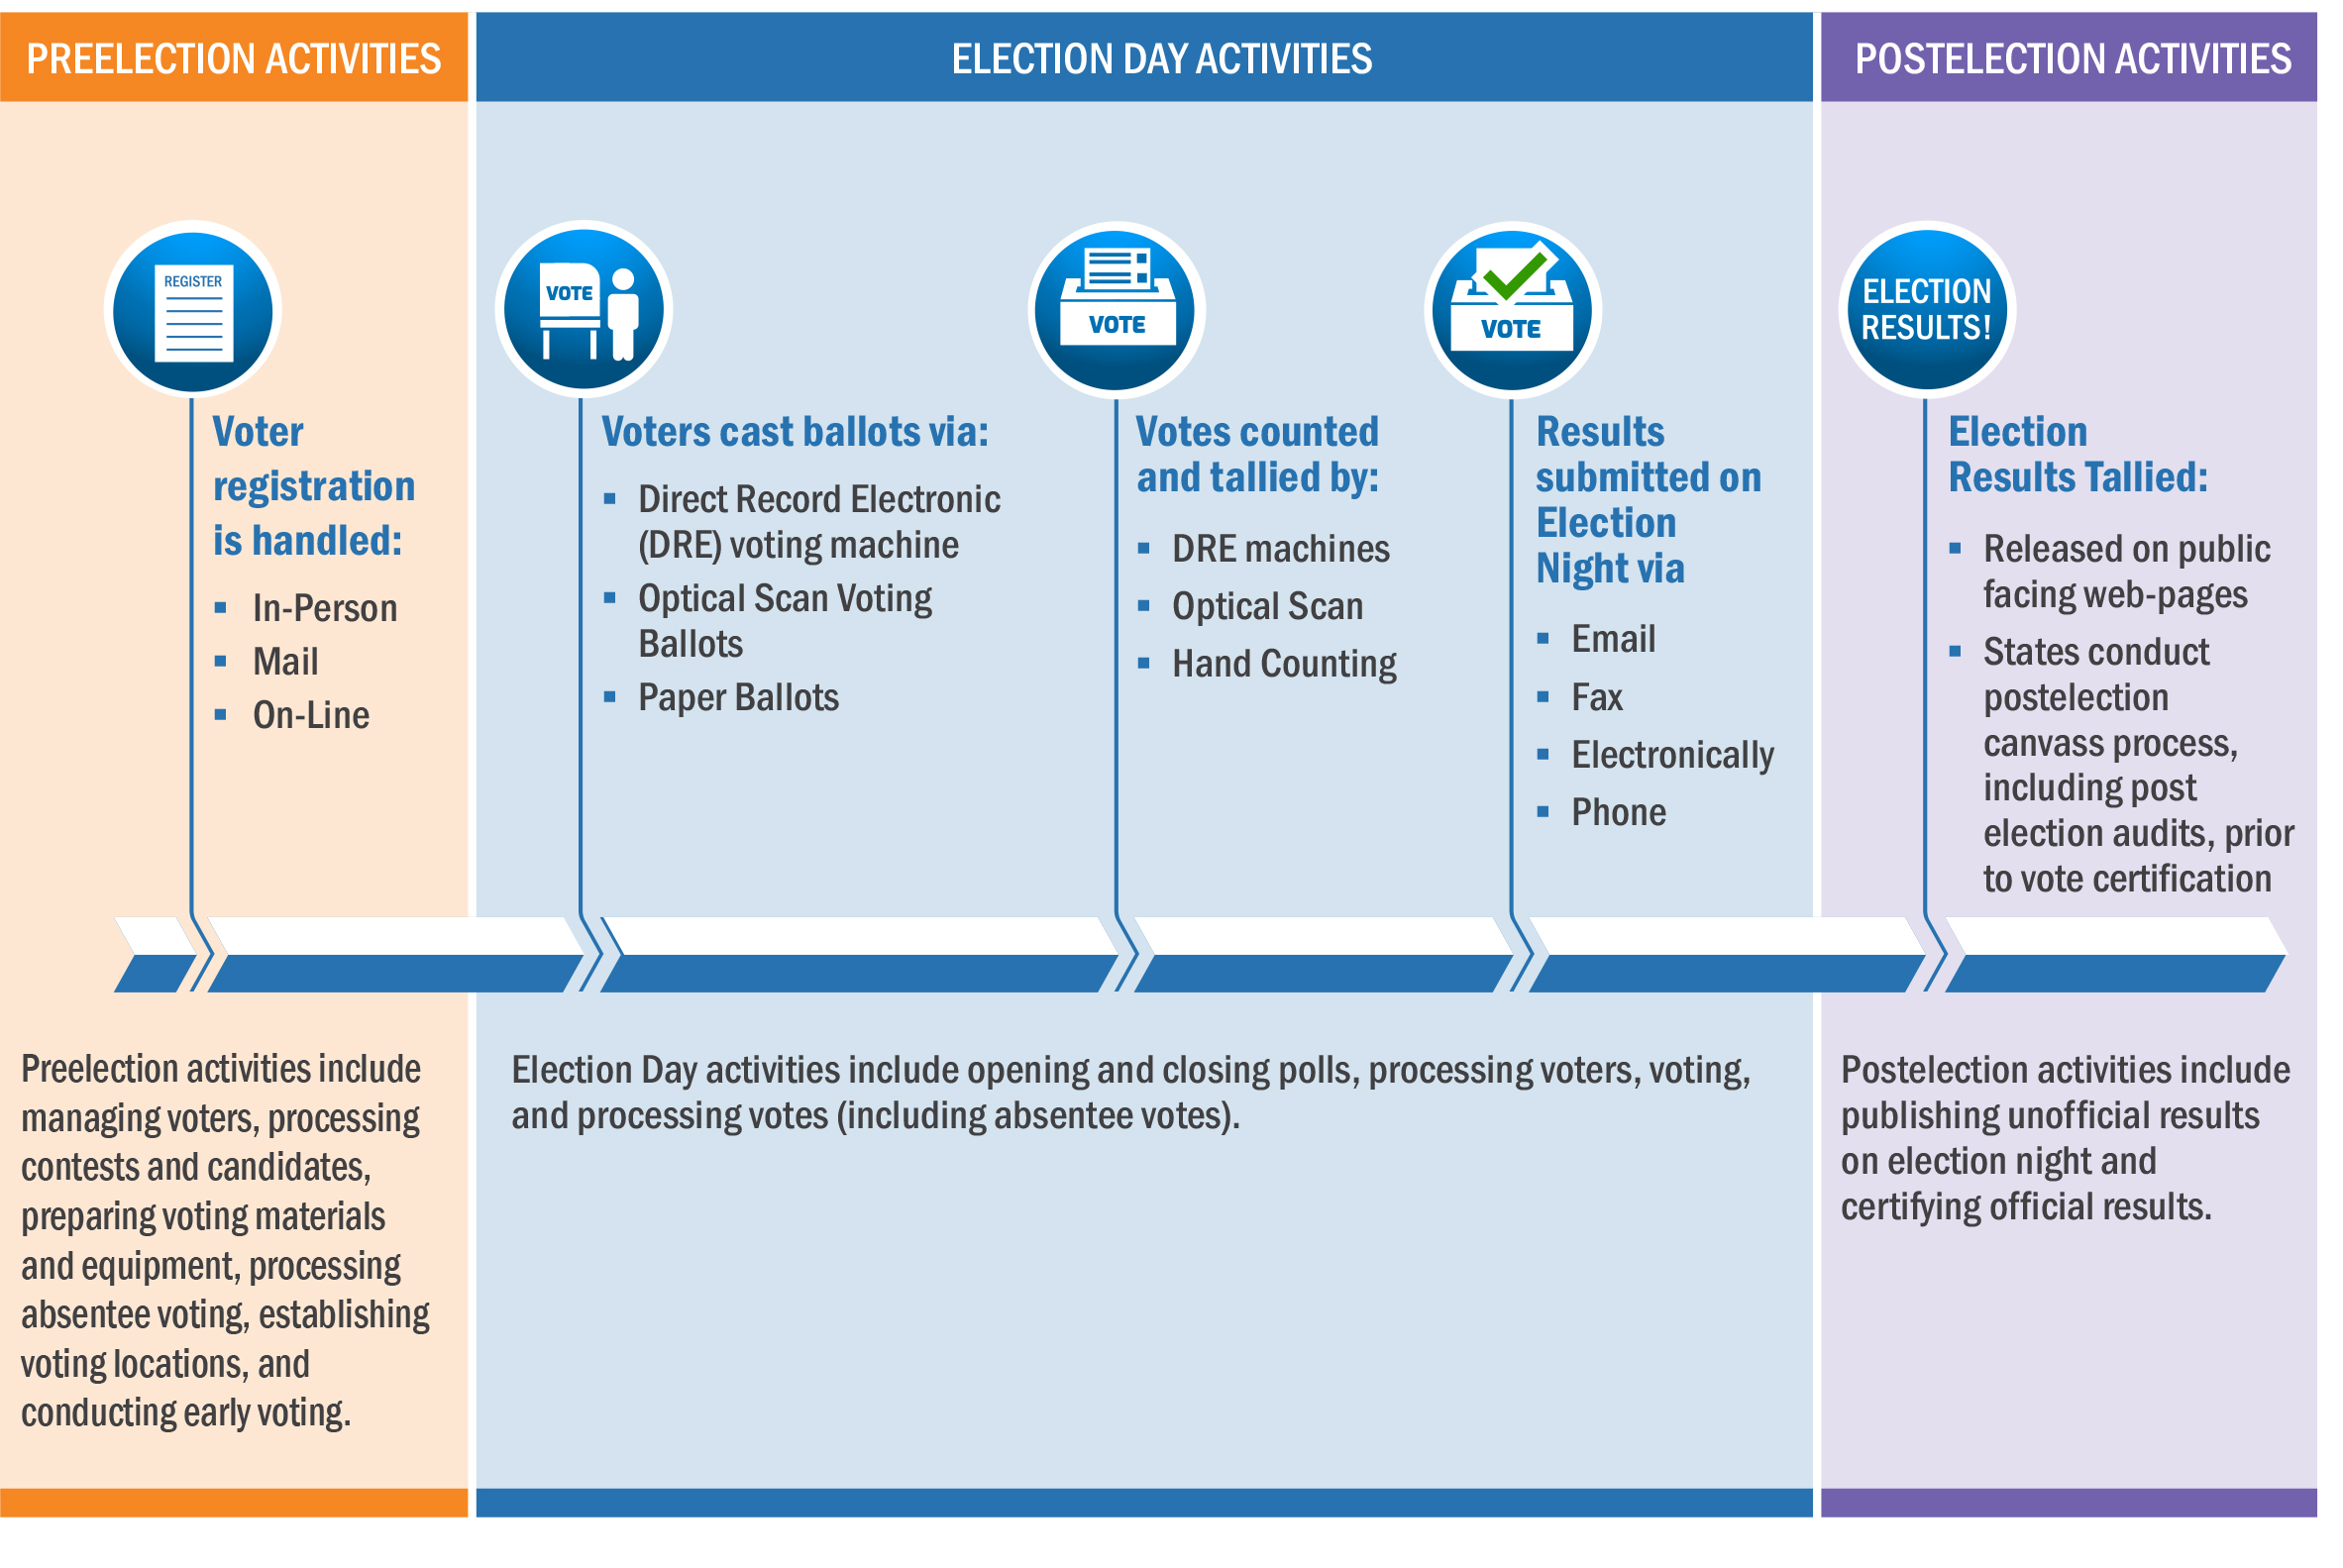 The graphic shows technology involved in elections divided into tasks conducted before, during and after the polls are open.